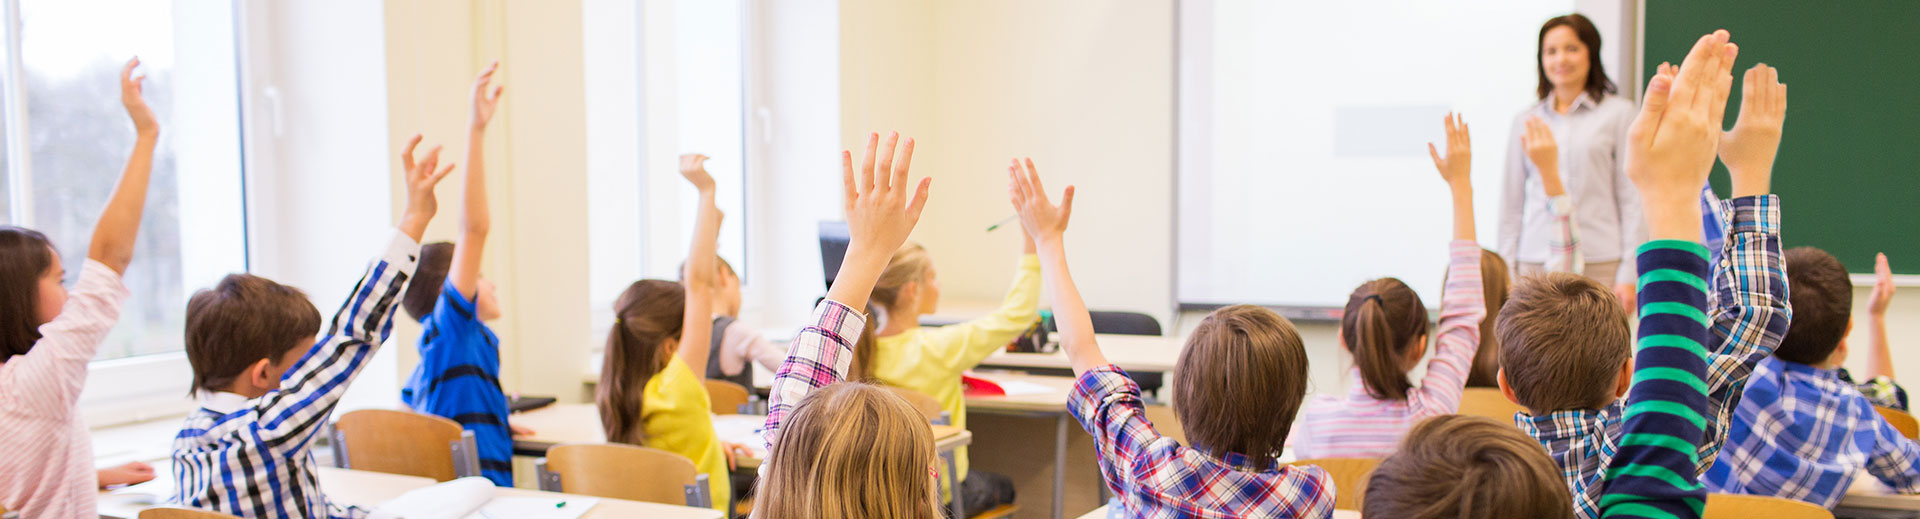 Photo of students raising their hands in a classroom